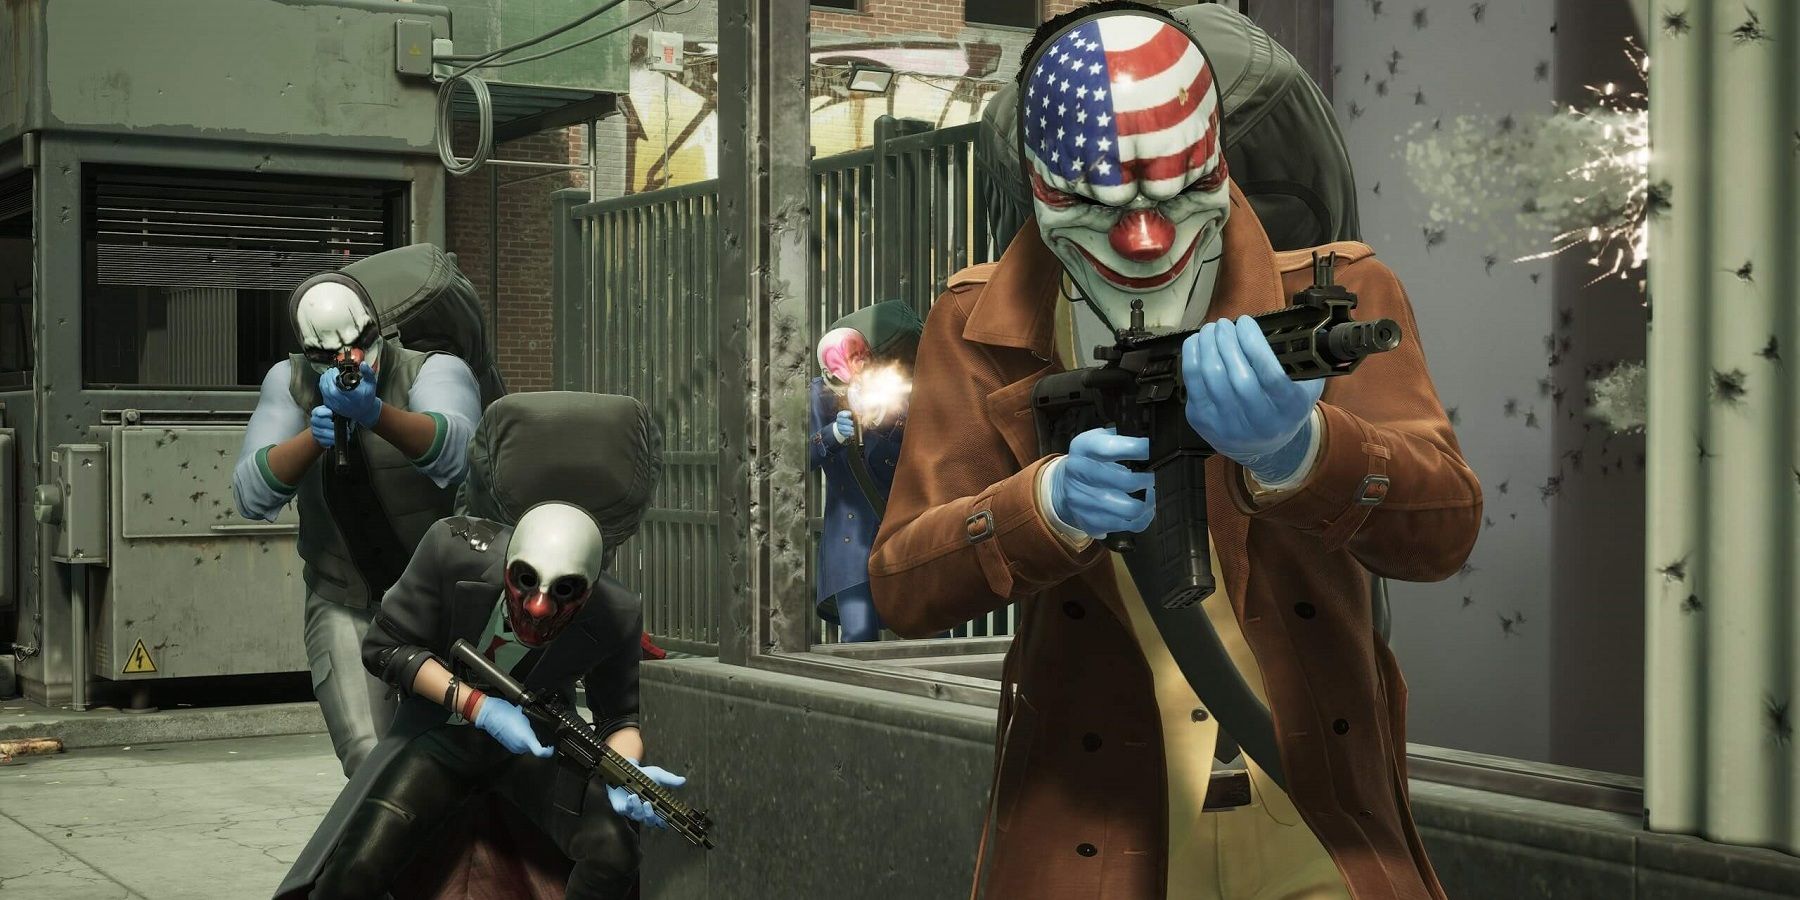 PAYDAY 3 Peaked at 1.3 Million Daily Users; Starbreeze Apologizes